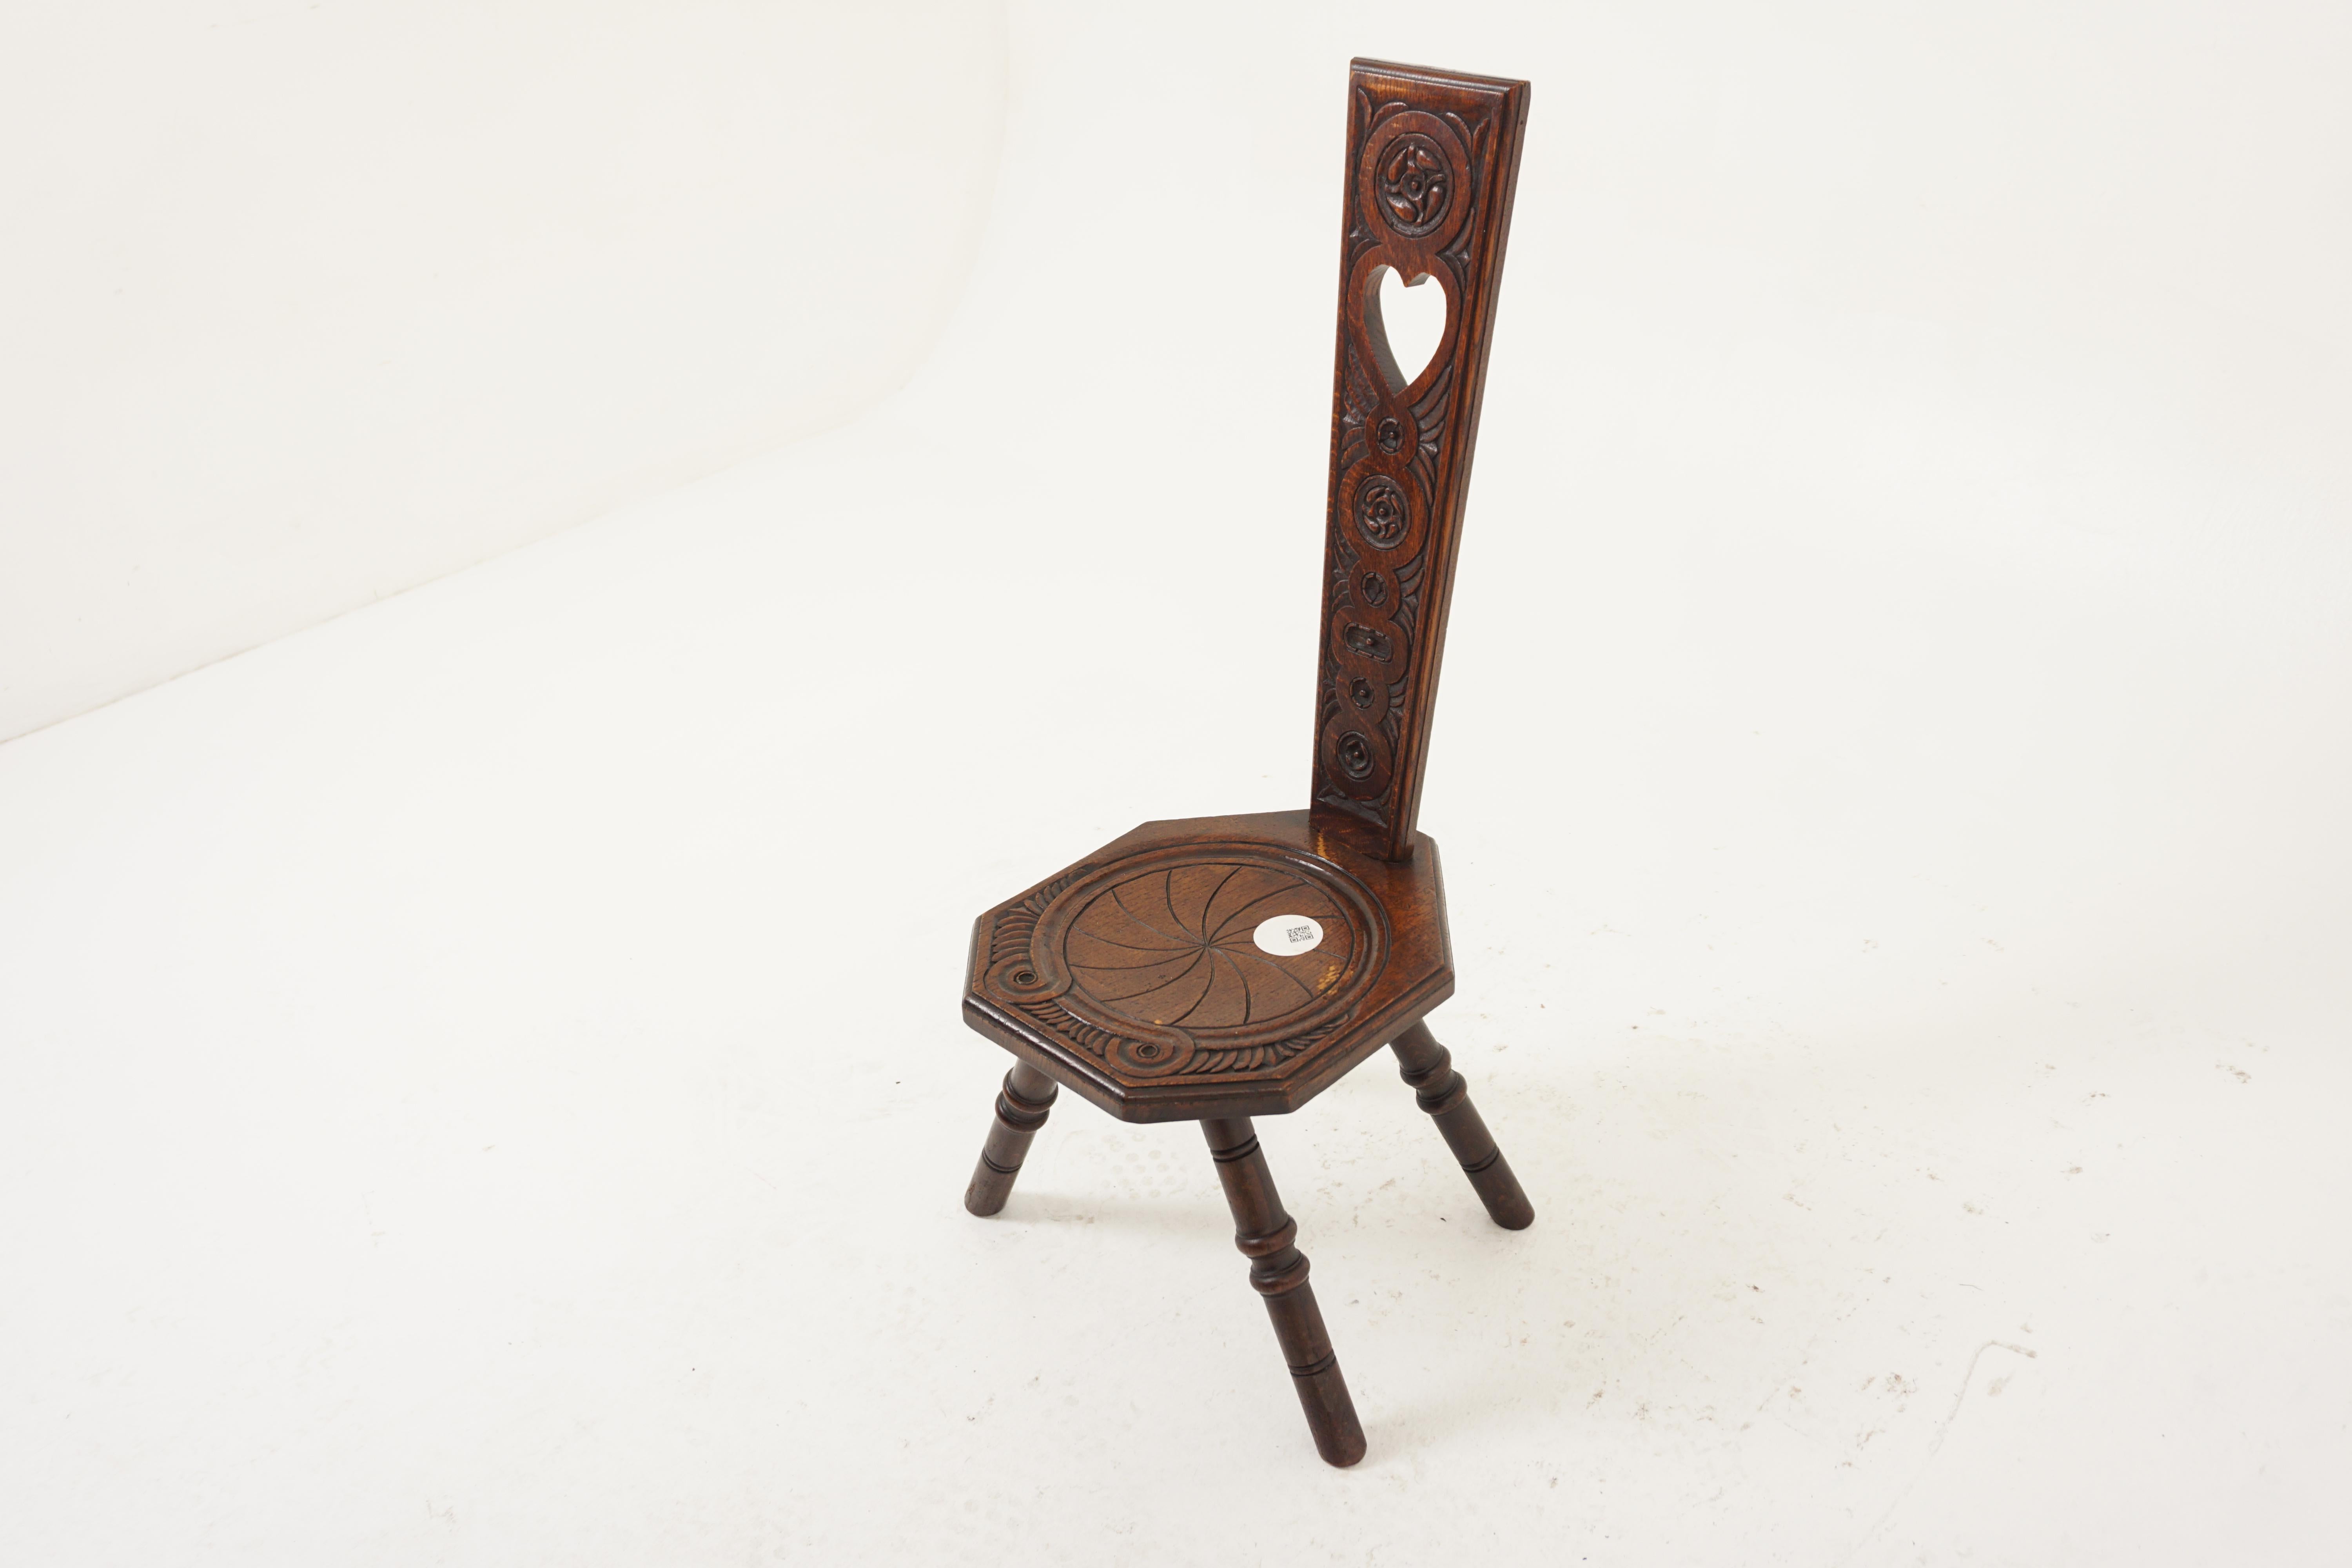 Antique Oak Chair, Carved Arts & Crafts Spinning Chair, Hall Chair, Antique Furniture, Scotland 1890, H1113

+ Scotland 1890
+ Solid Oak
+ Original finish
+ Decorated to the seat and back with a floral inspired design
+ Cut out heart shaped